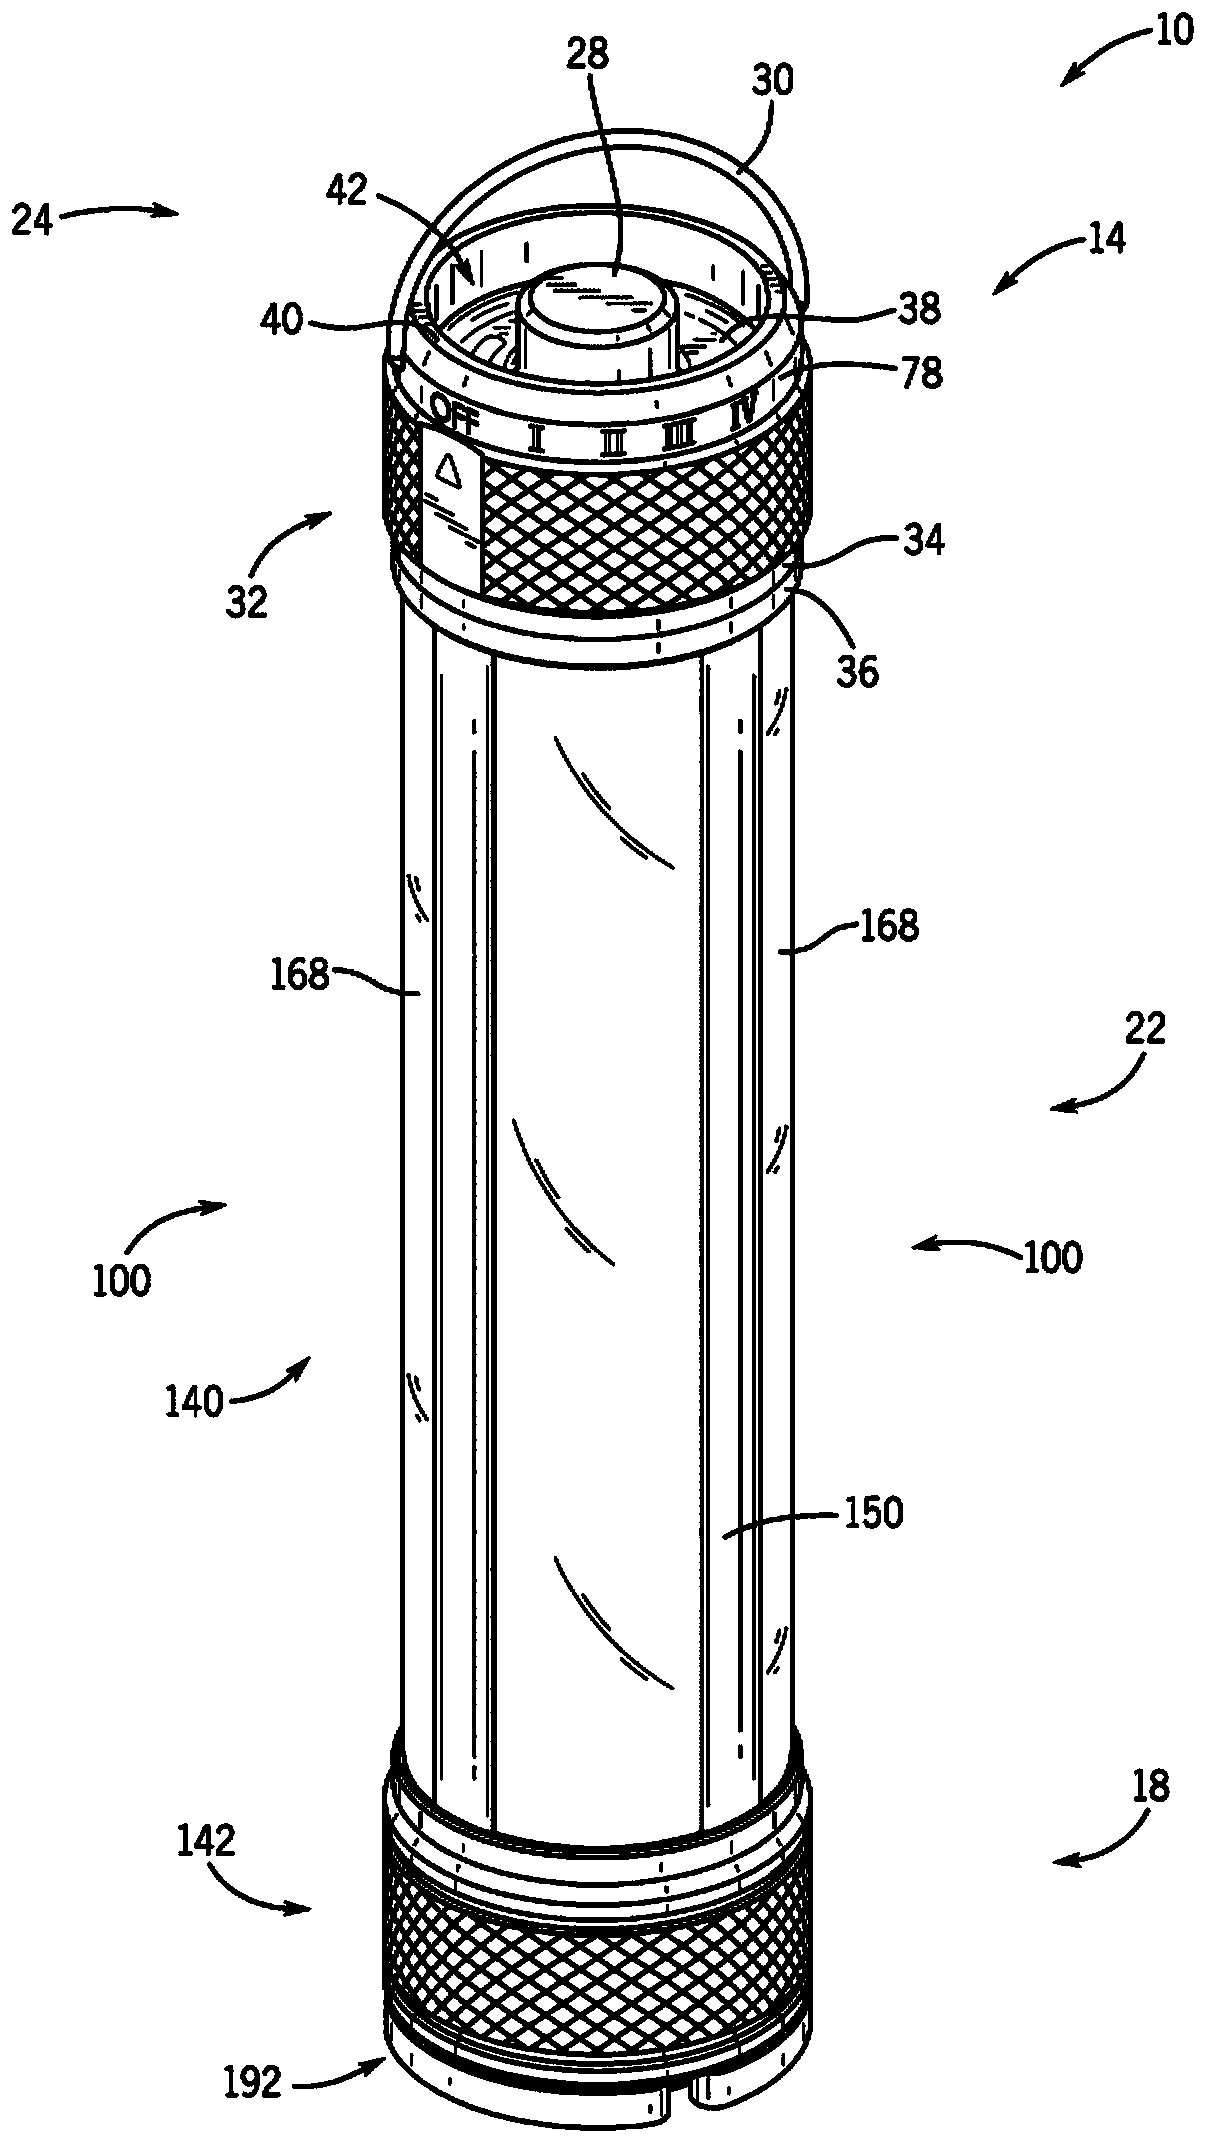 Portable lantern light with multiple operating modes